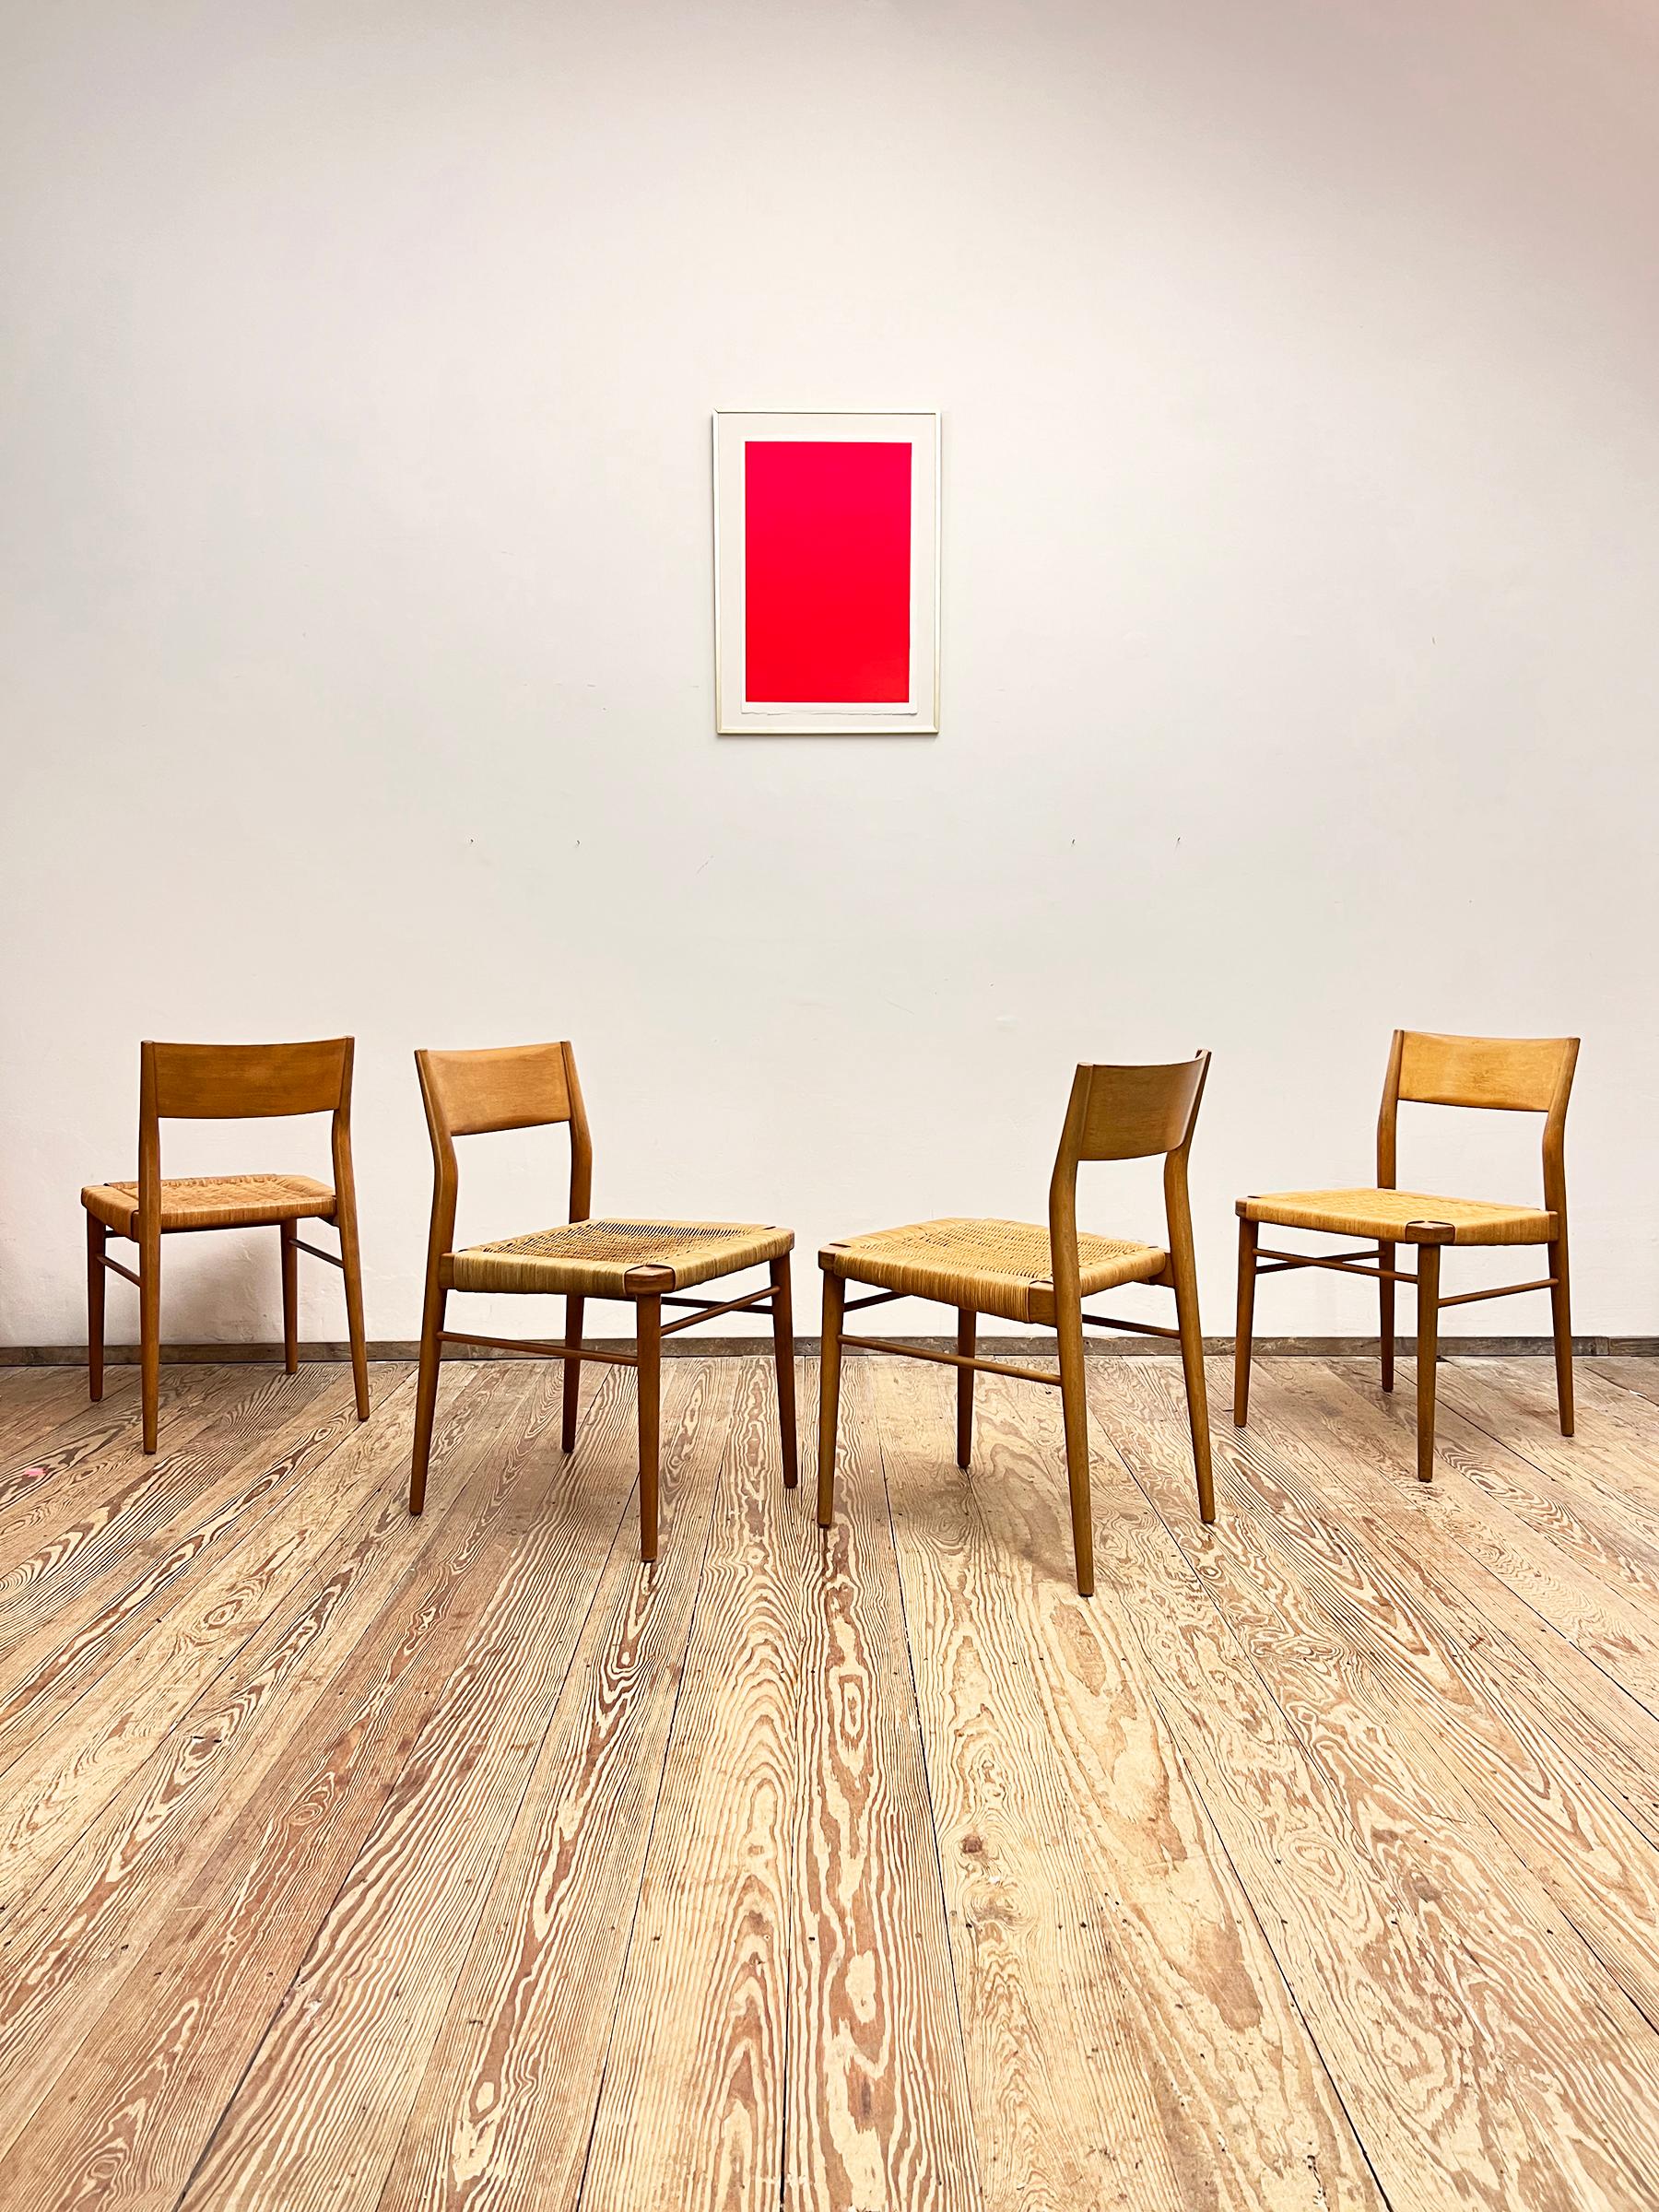 Dimensions: 49 x 47 x 76 x 42cm (width x depth x height x seat height)

This beautiful set of vintage dining chairs, model 351 designed by Georg Leowald was Manufactured by Wilkhahn, Germany. The set features 4 chairs of massive bright wood. The